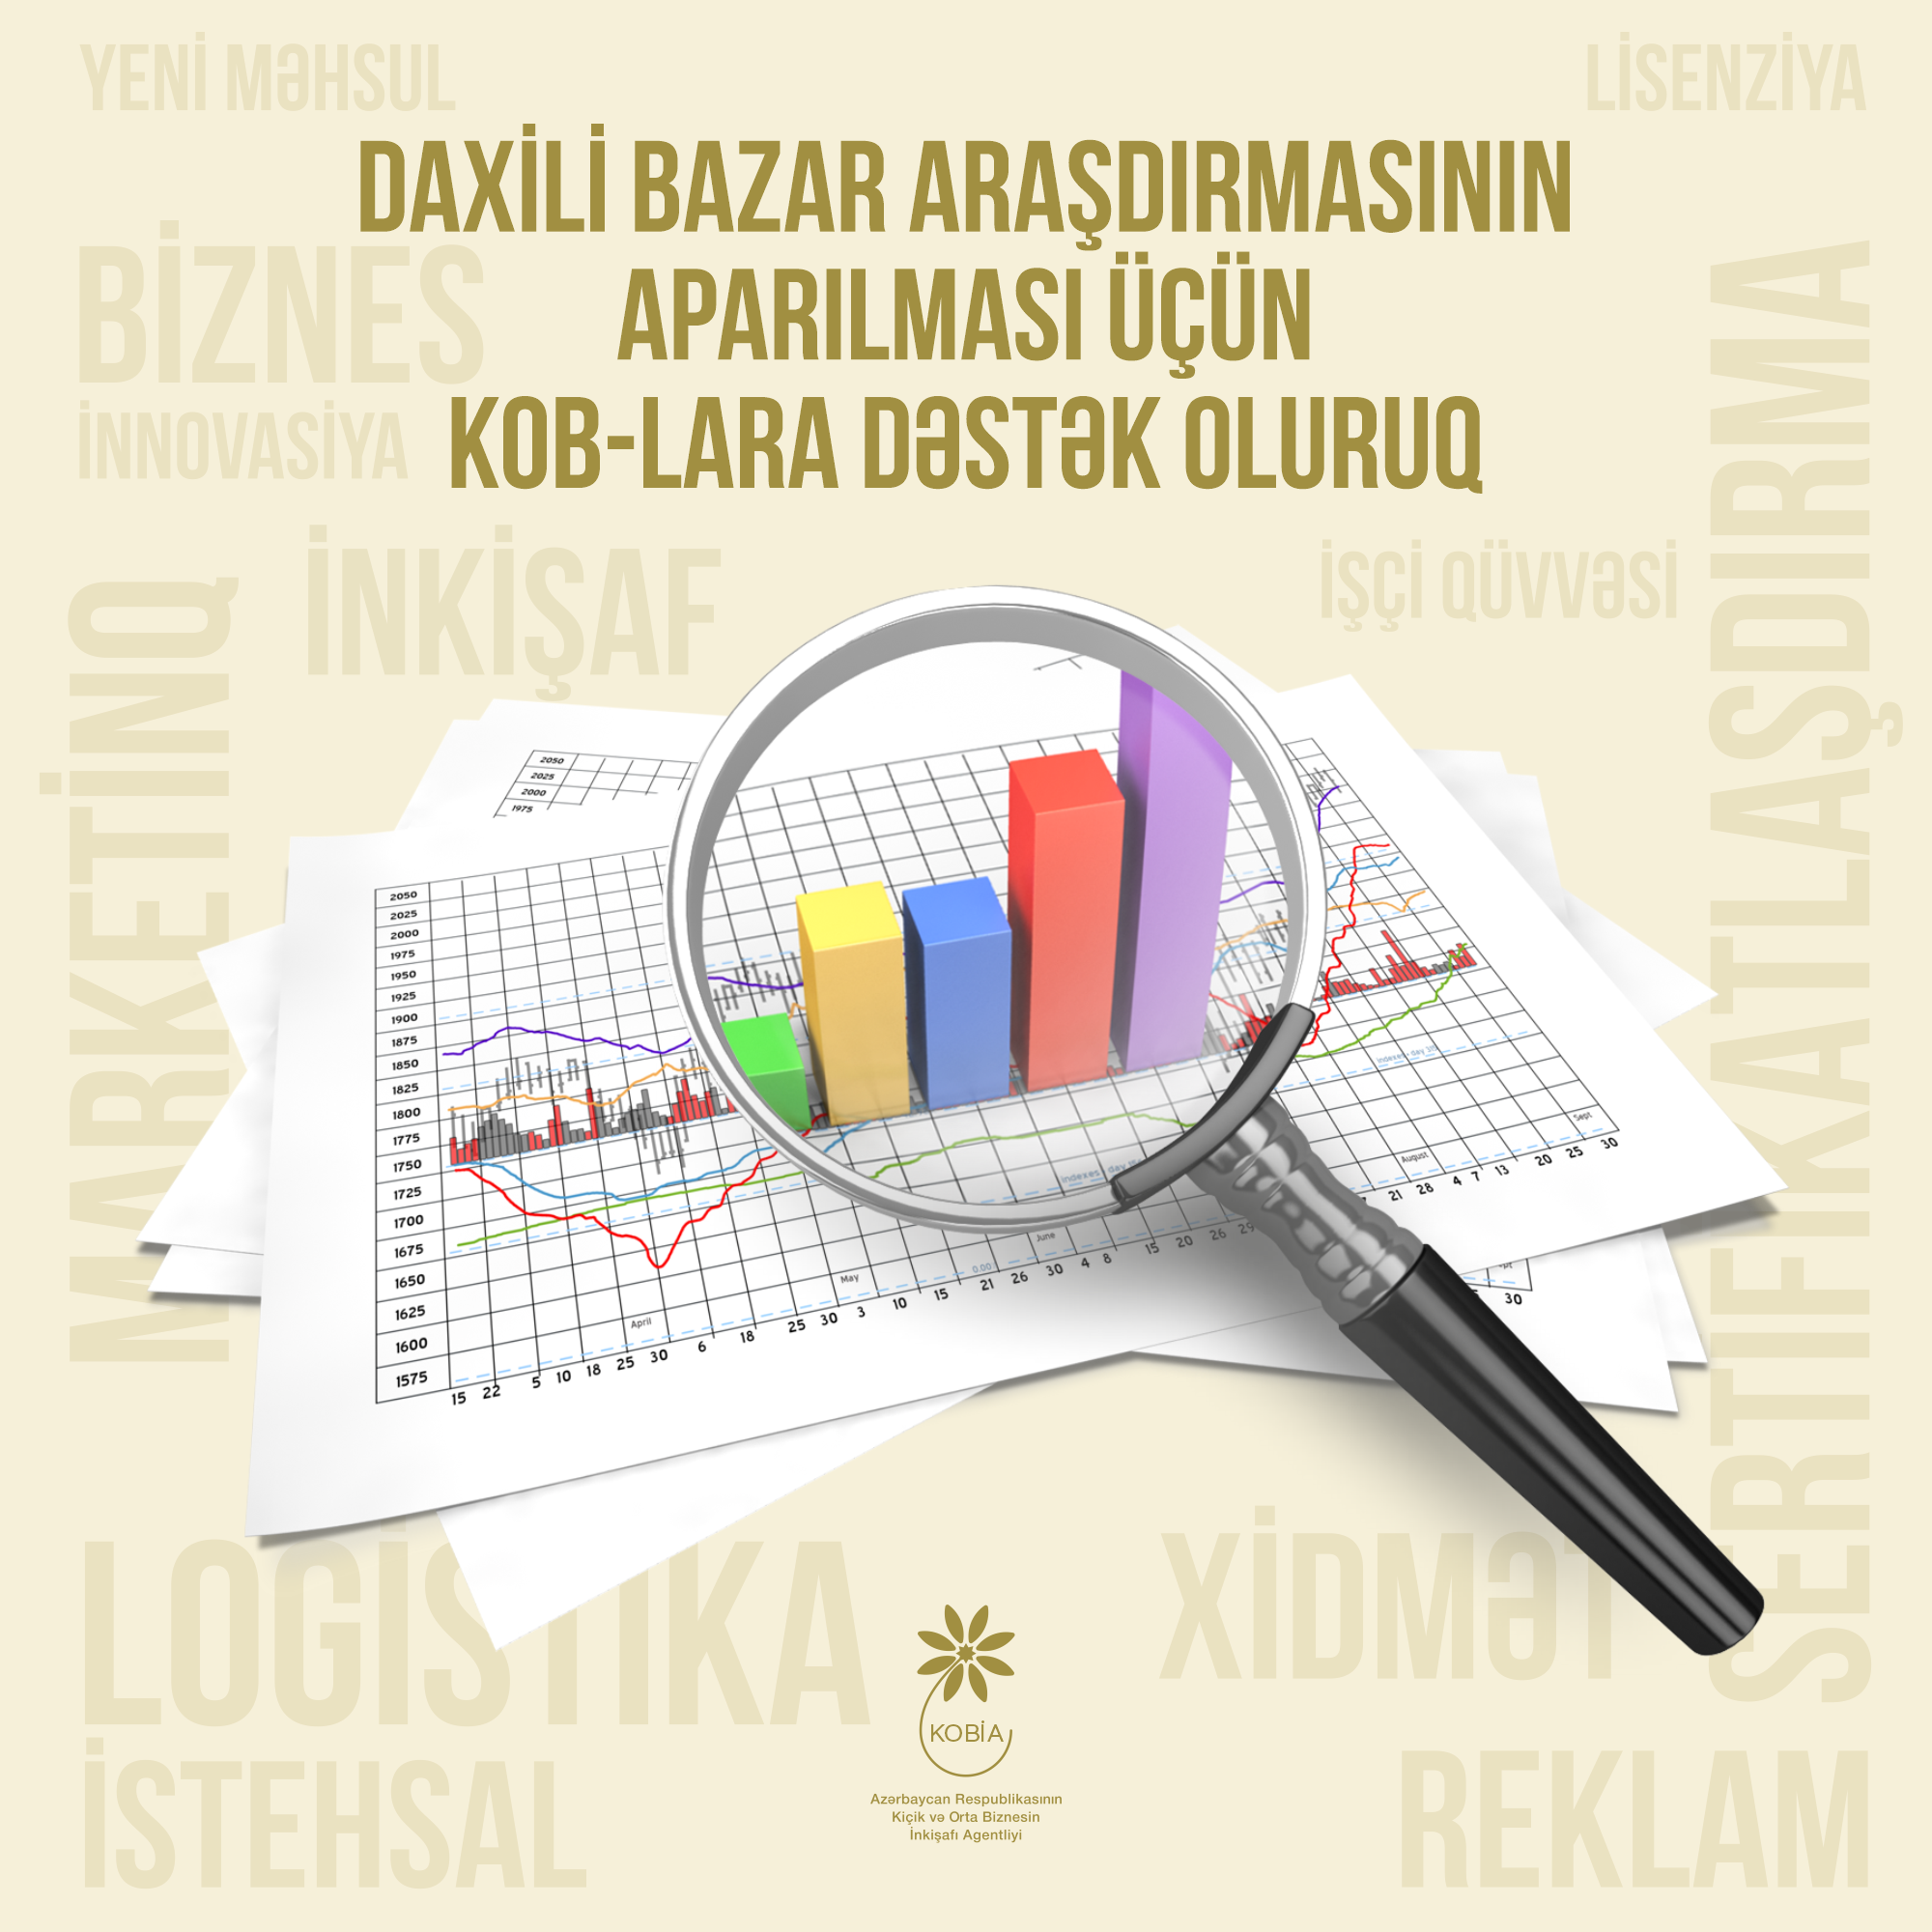 Internal market research conducted for entrepreneurs in 7 areas 